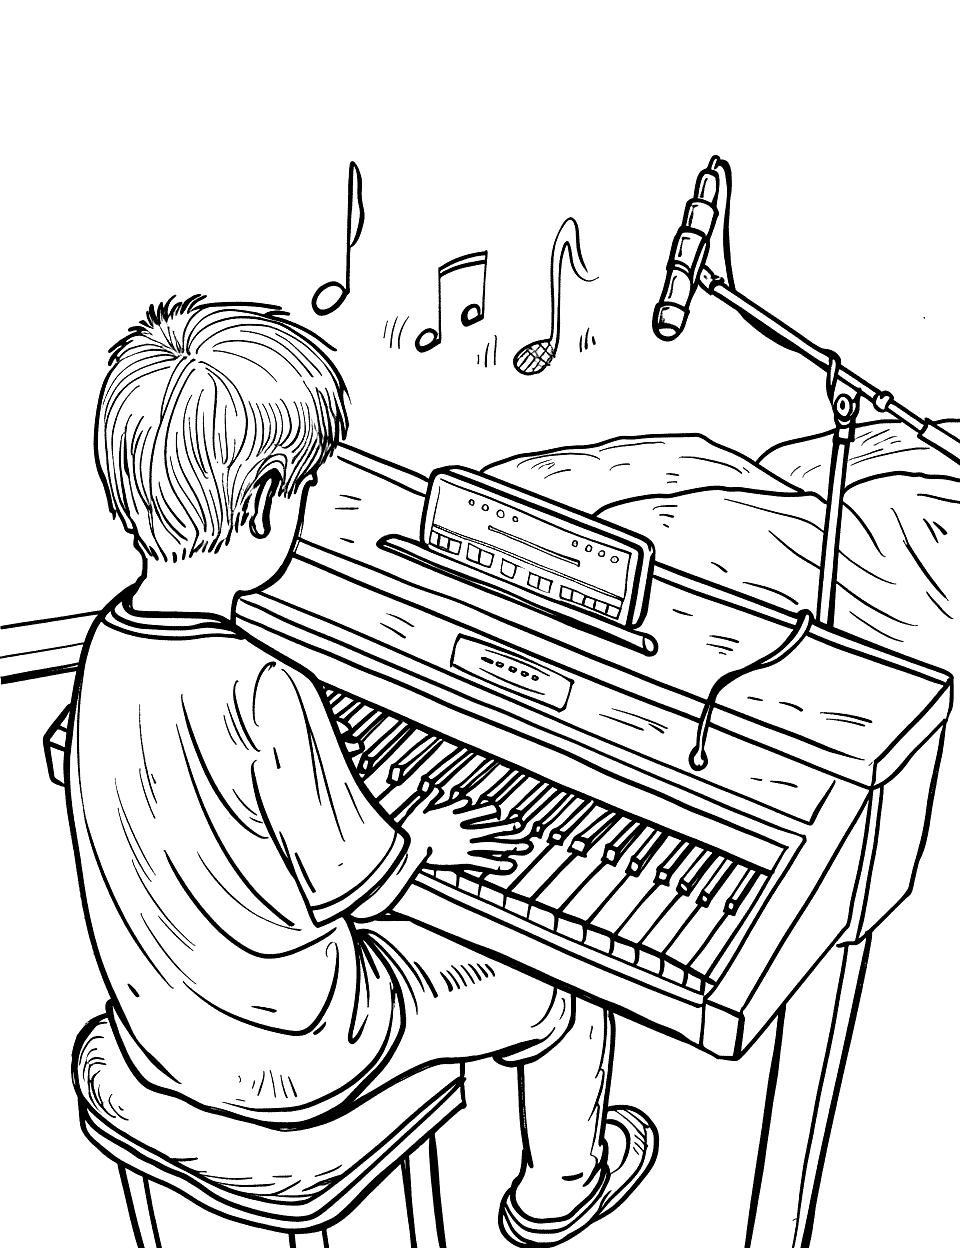 Keyboard Practice at Home Music Coloring Page - A teenager playing a keyboard in their bedroom.